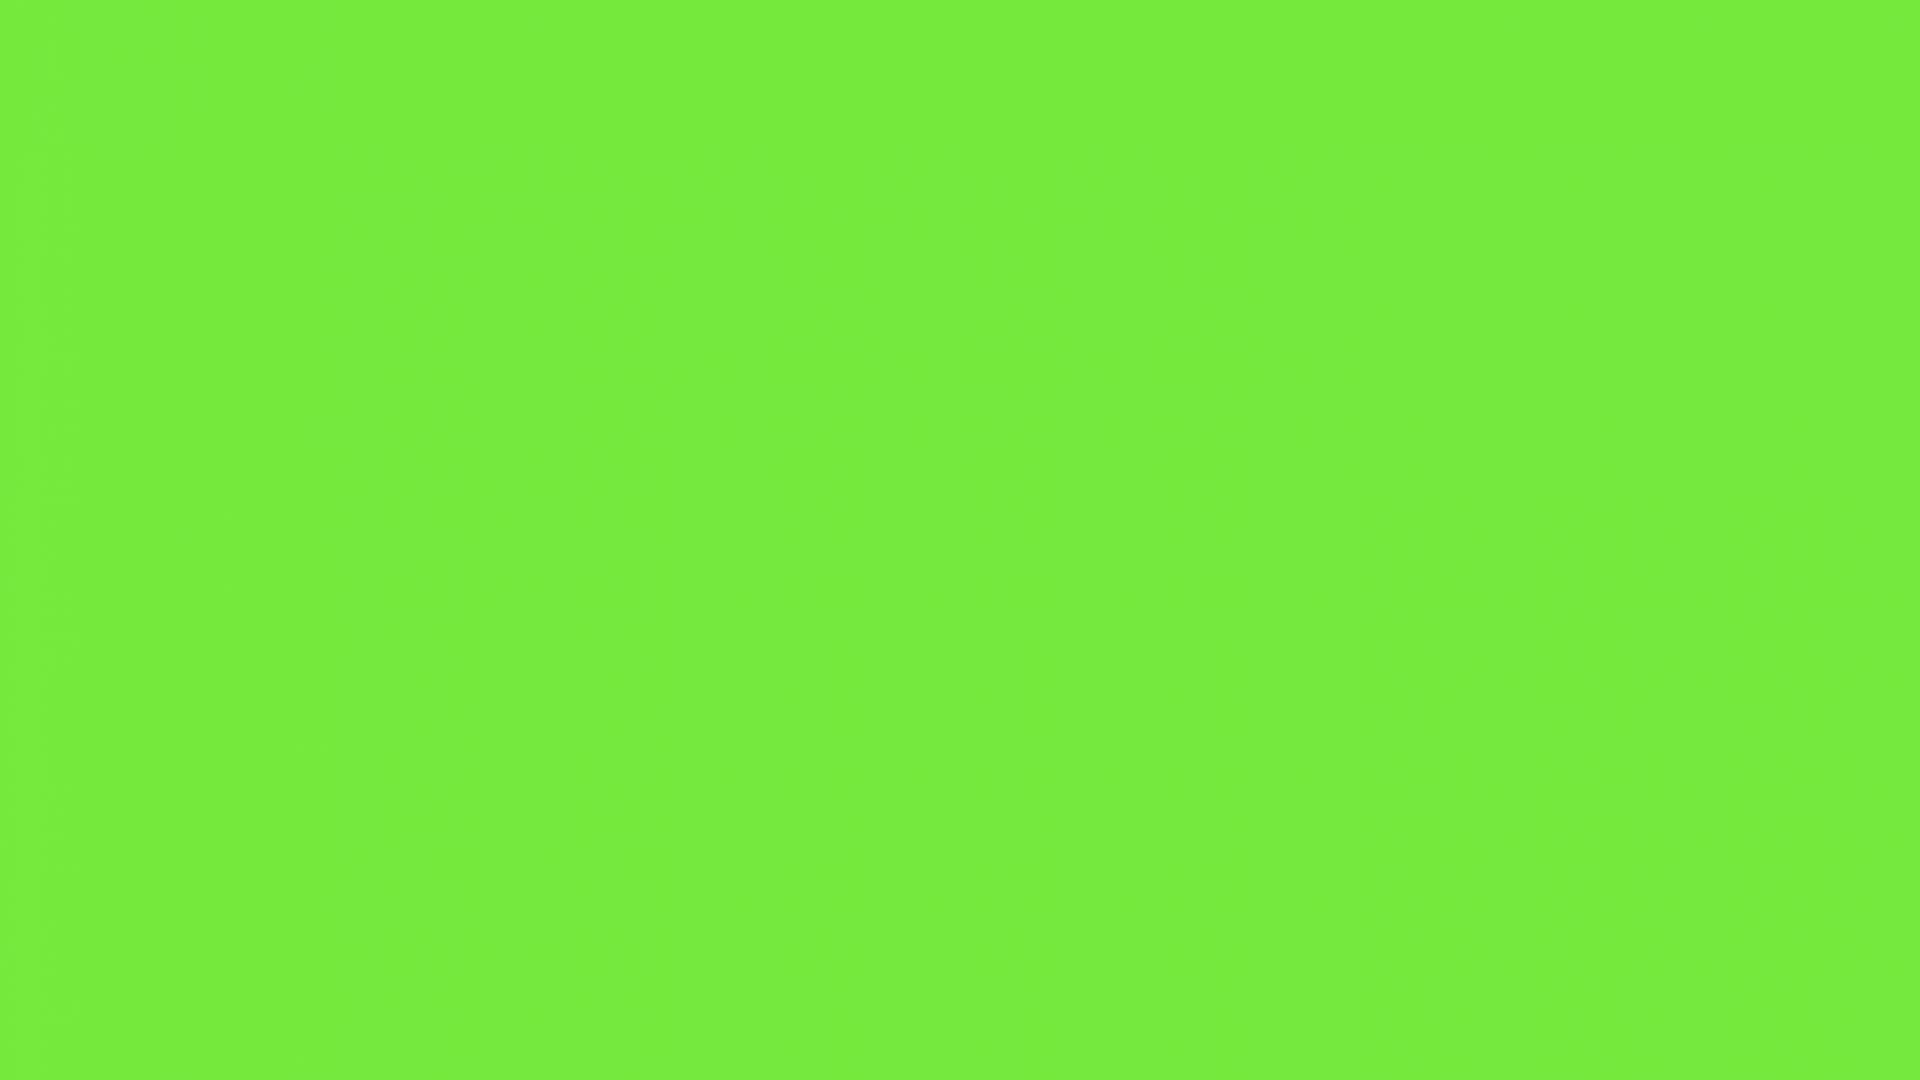 Plain Green Background Abstraction HD Green Wallpapers  HD Wallpapers  ID  95148